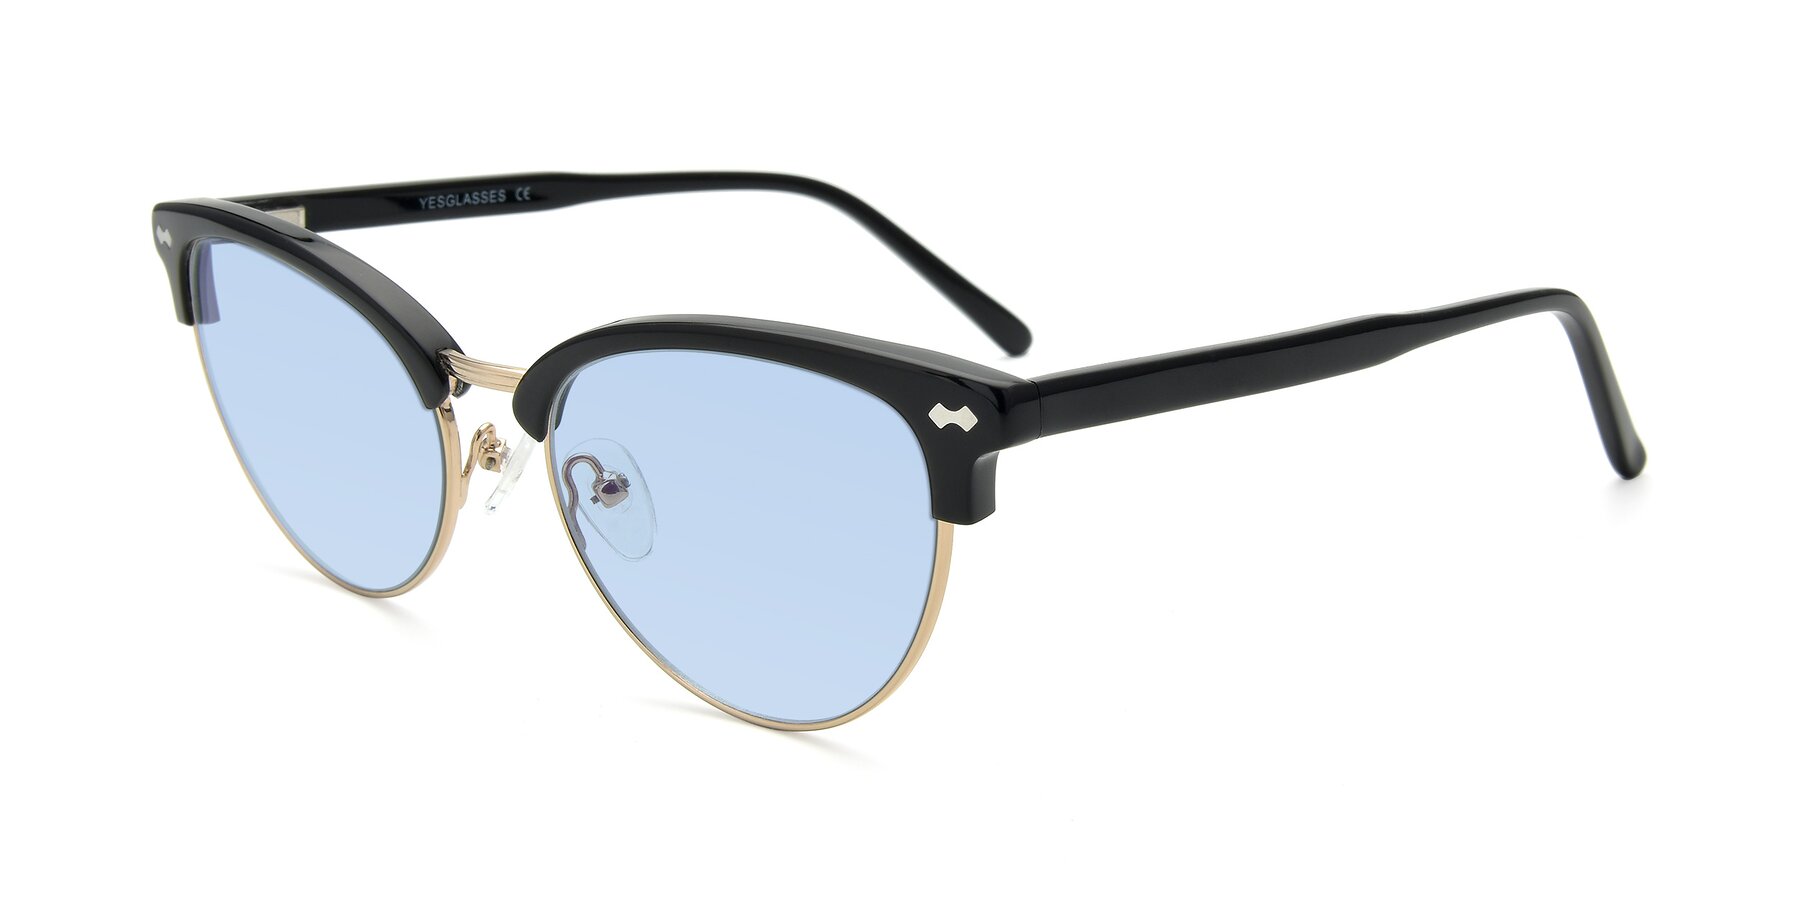 Angle of 17461 in Black-Gold with Light Blue Tinted Lenses